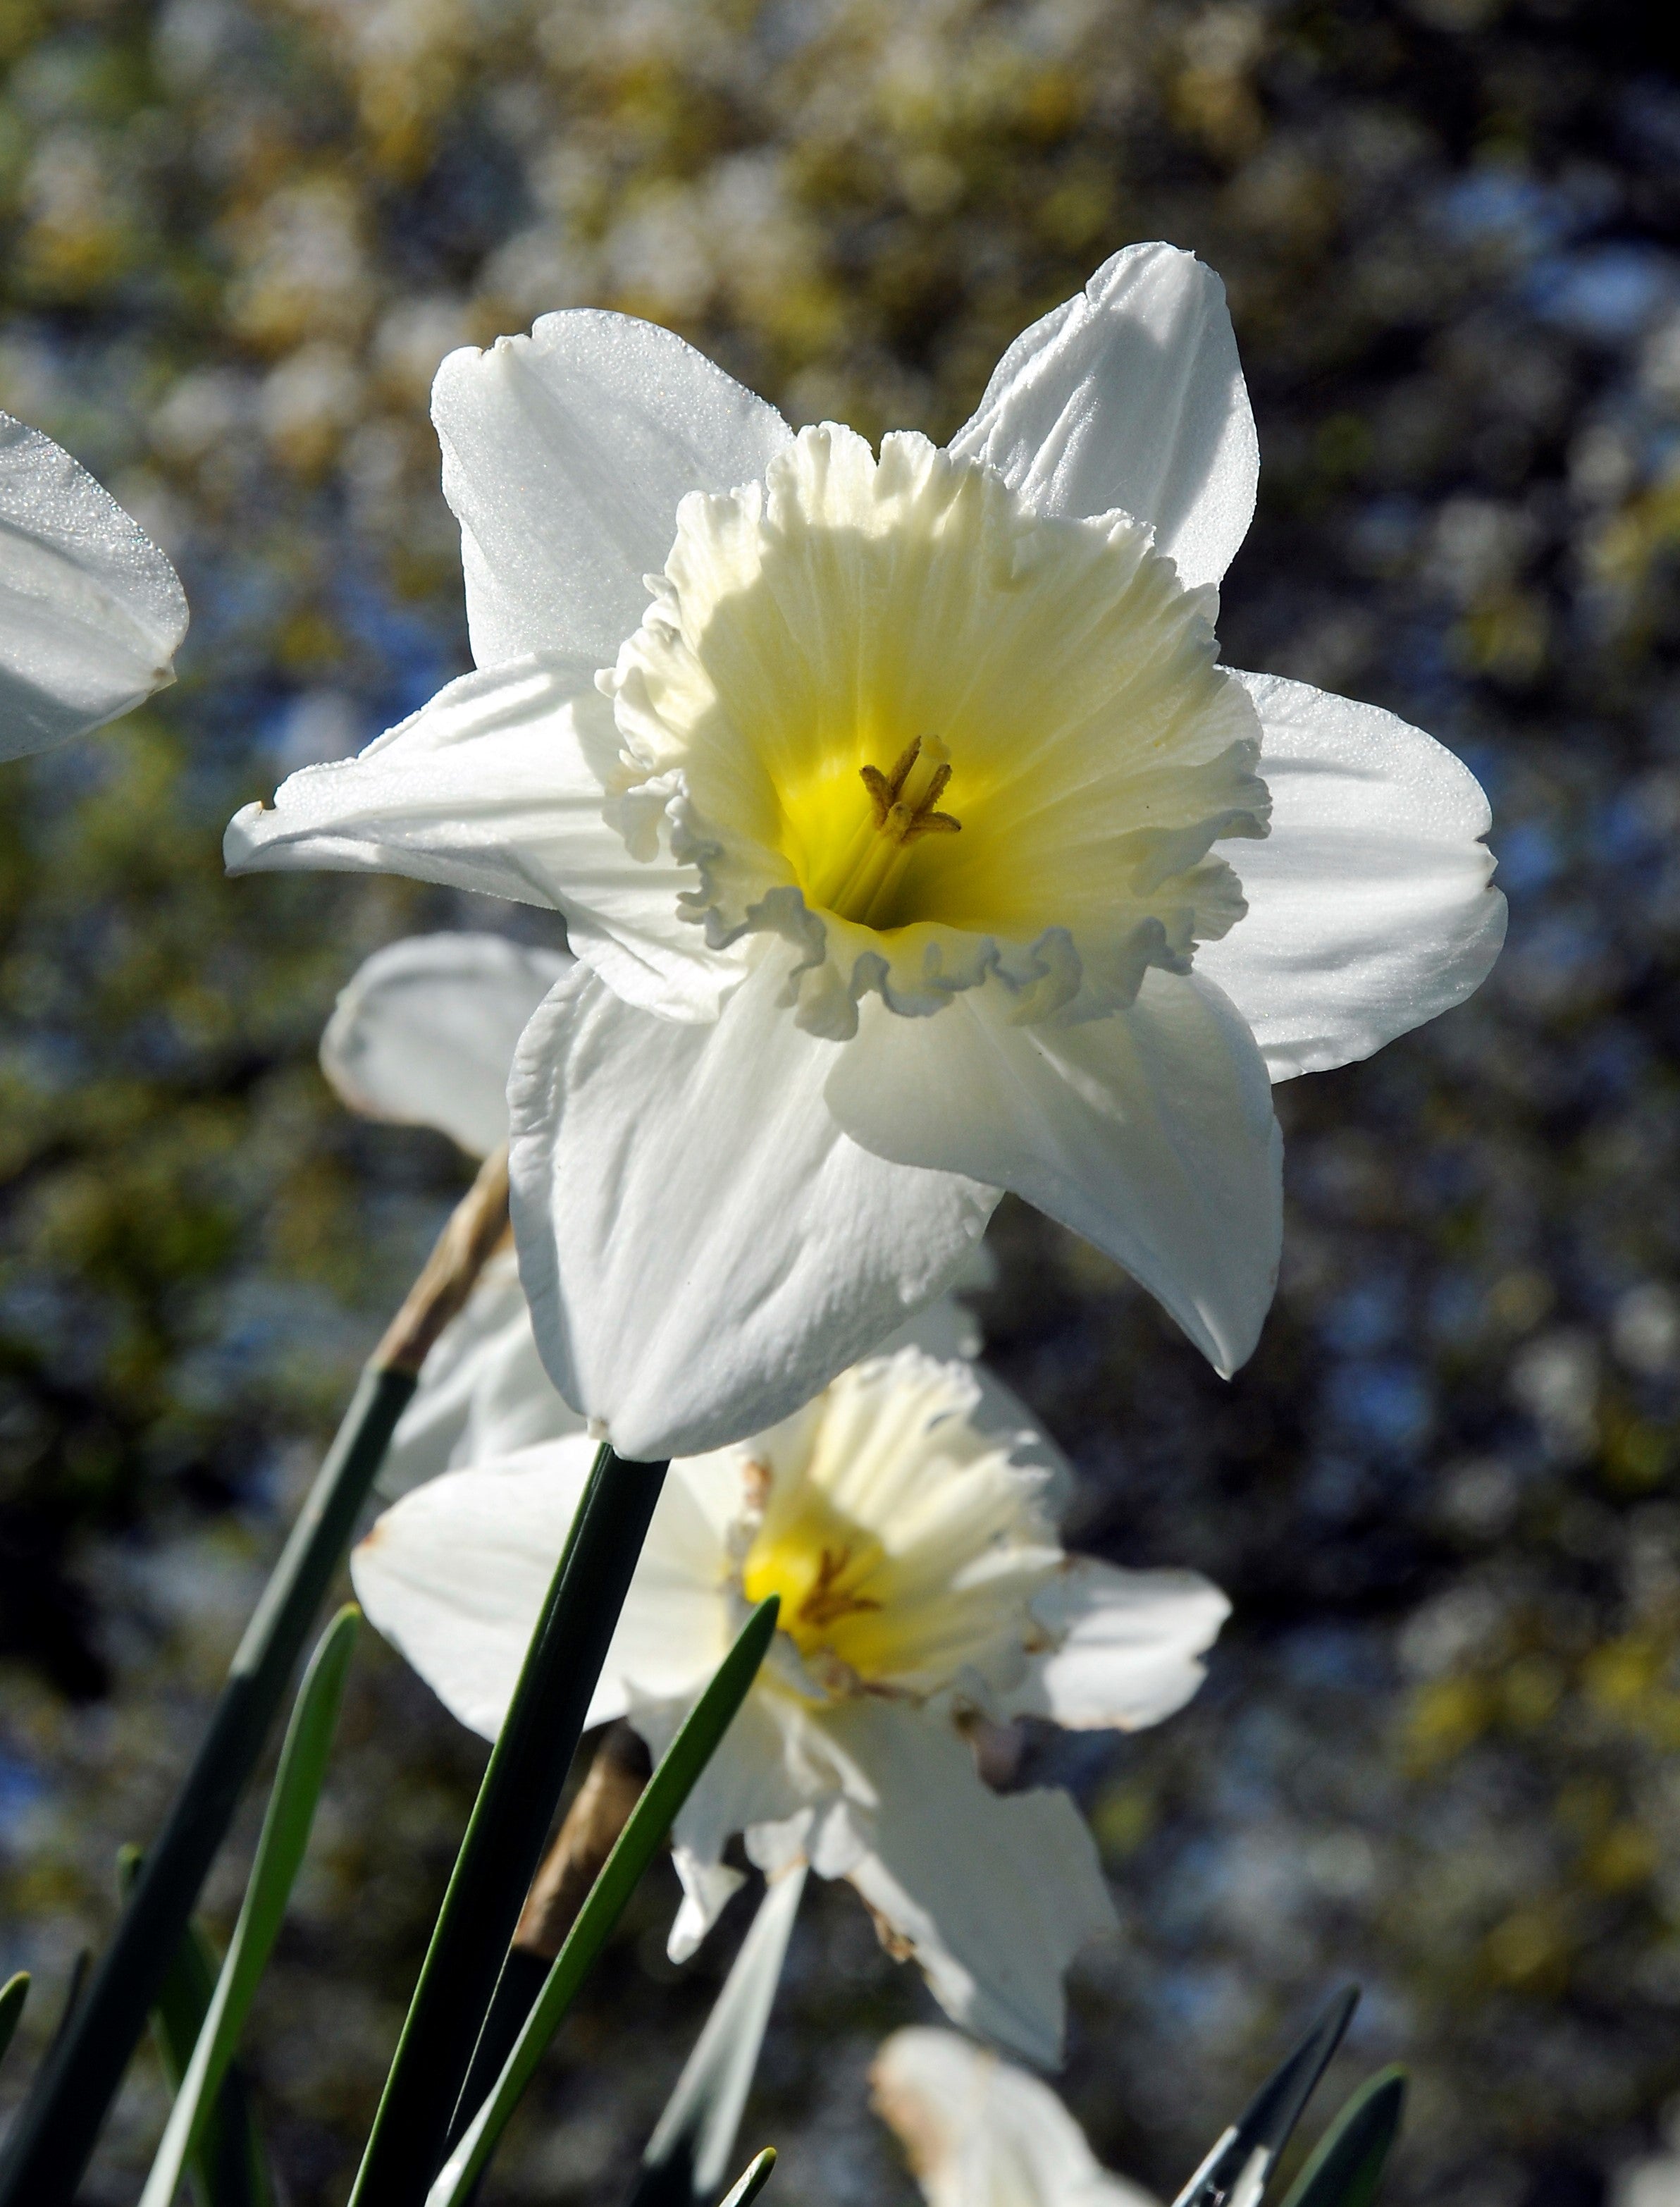 Close-up of Mount Hood Daffodil with white petals and yellow cup.